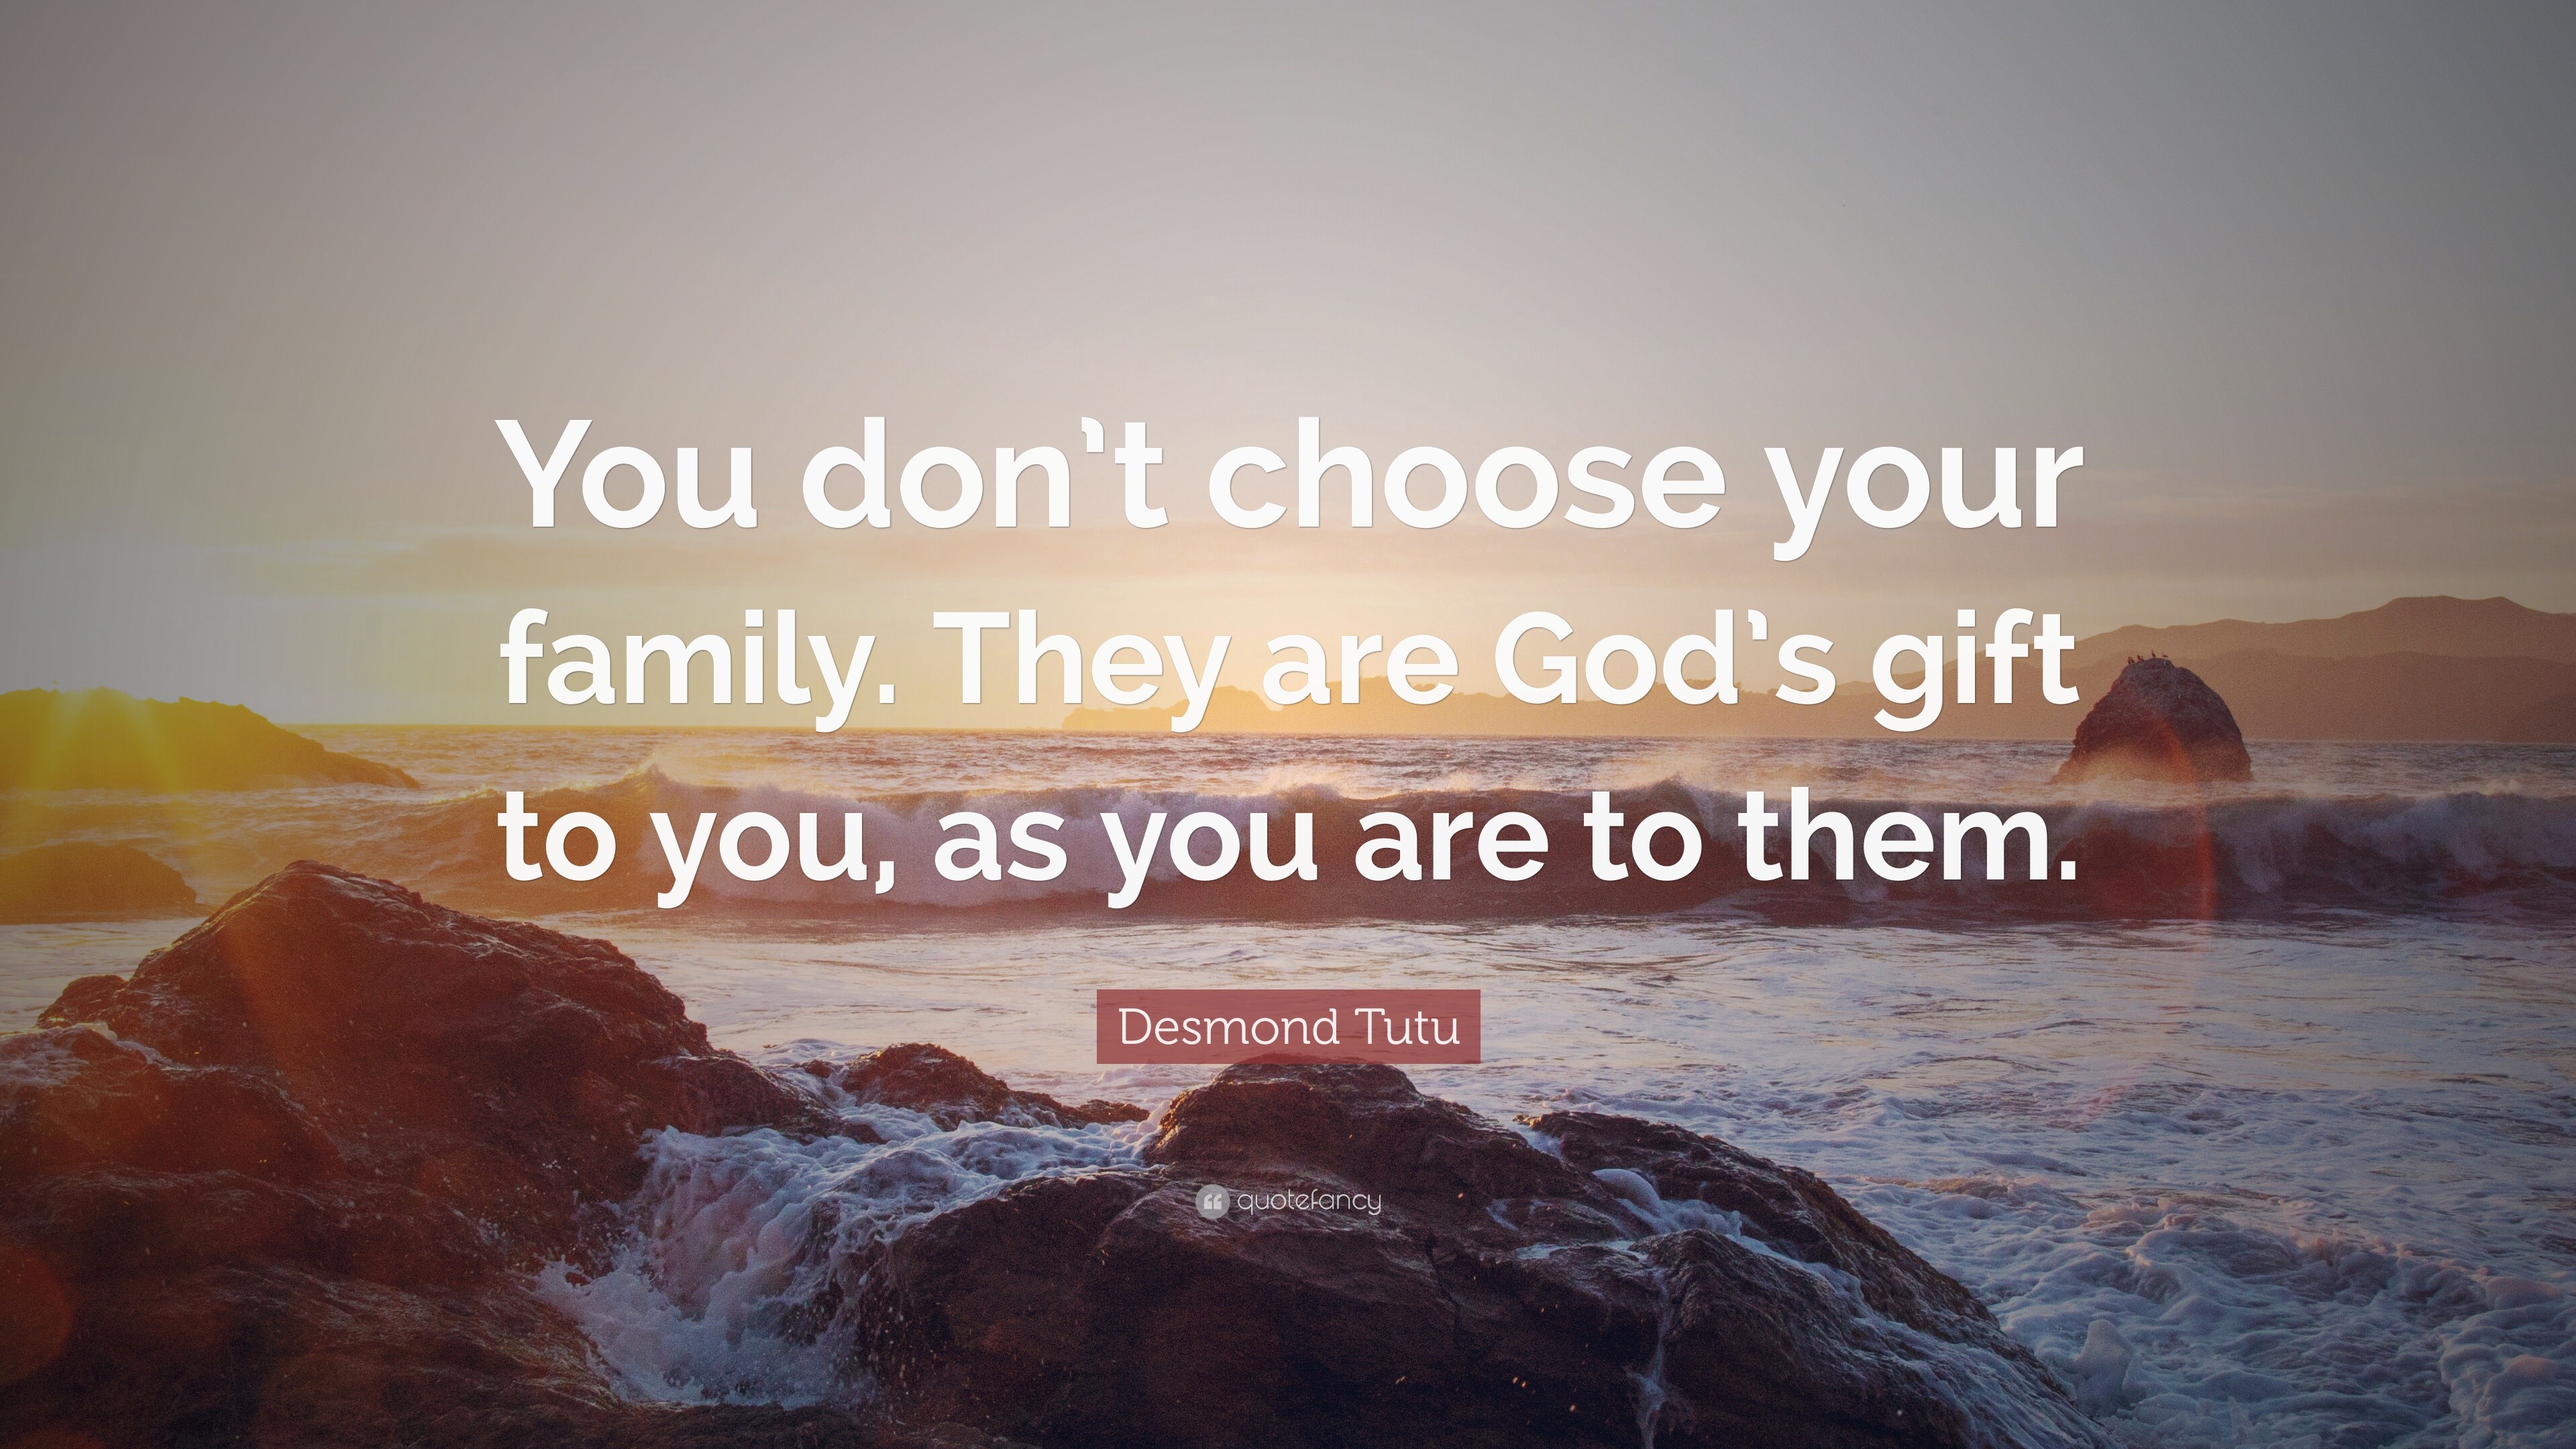 Desmond Tutu Quote: "You don't choose your family. They ...